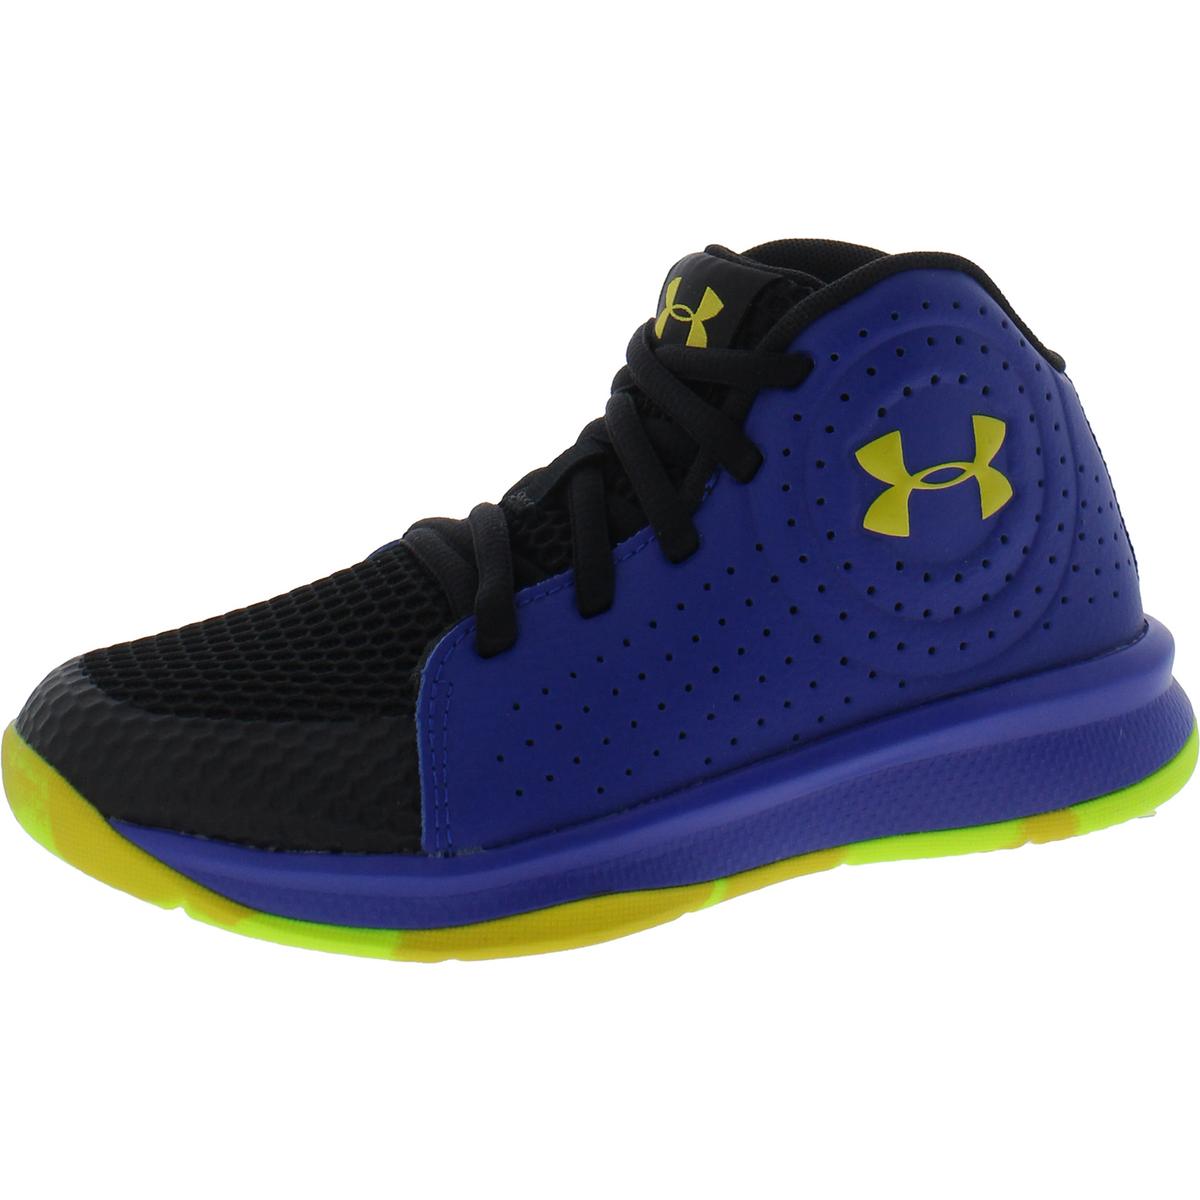 Under Armour UA PS Jet 2019 Boys Leather Gym Athletic and Training Shoes